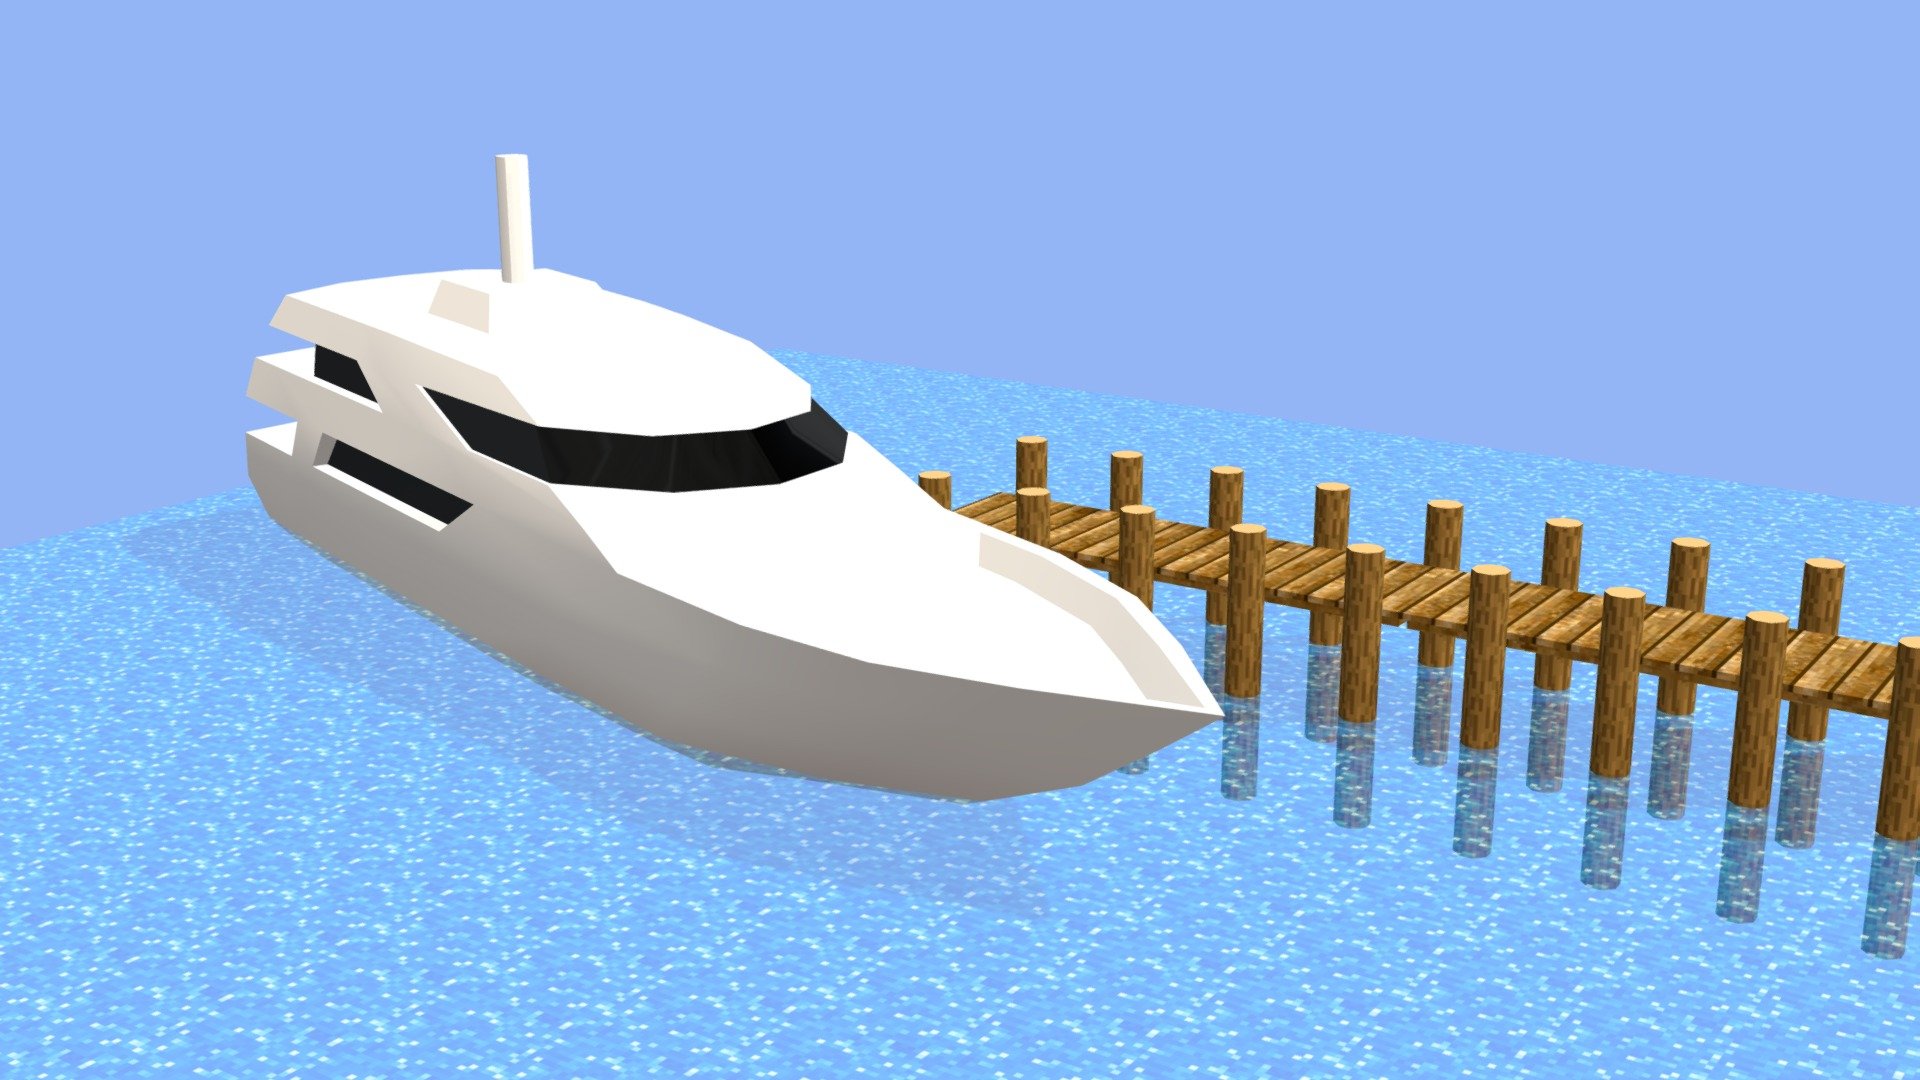 A low-poly pier and boat with only basic shape to convey what the object is. Both are sitting in water. Textures are pixellated, similarly to Minecraft 3d model